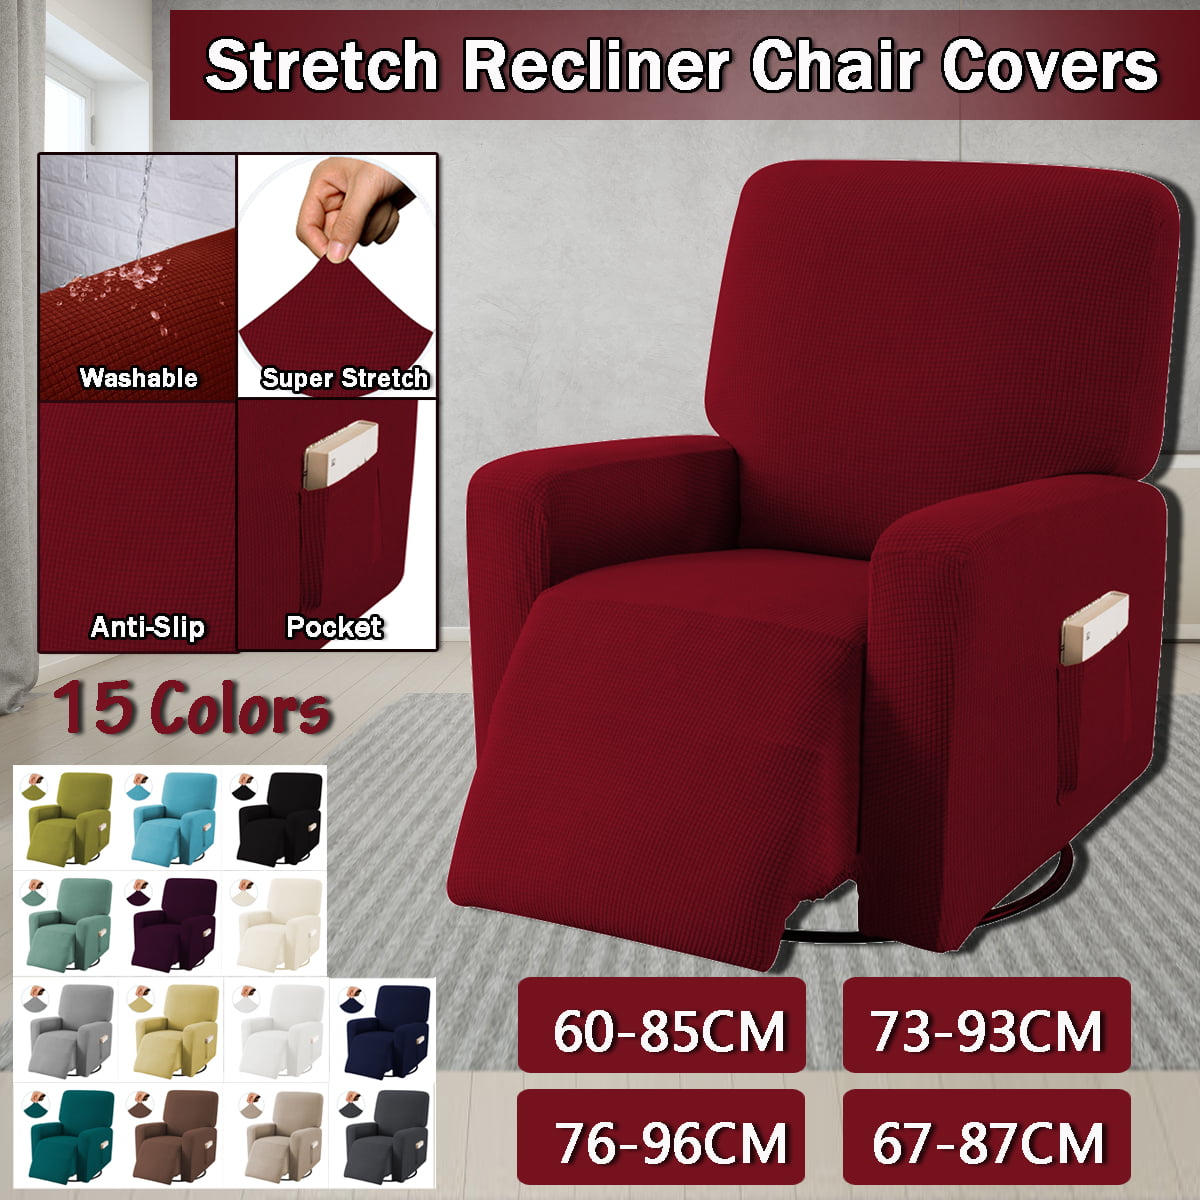 Black Trintion Sofa Slipcover Chair Seat Cover Reversible Furniture Protector Waterproof Recliner Chair Covers Slipcover Protector Reclining Chair Covers